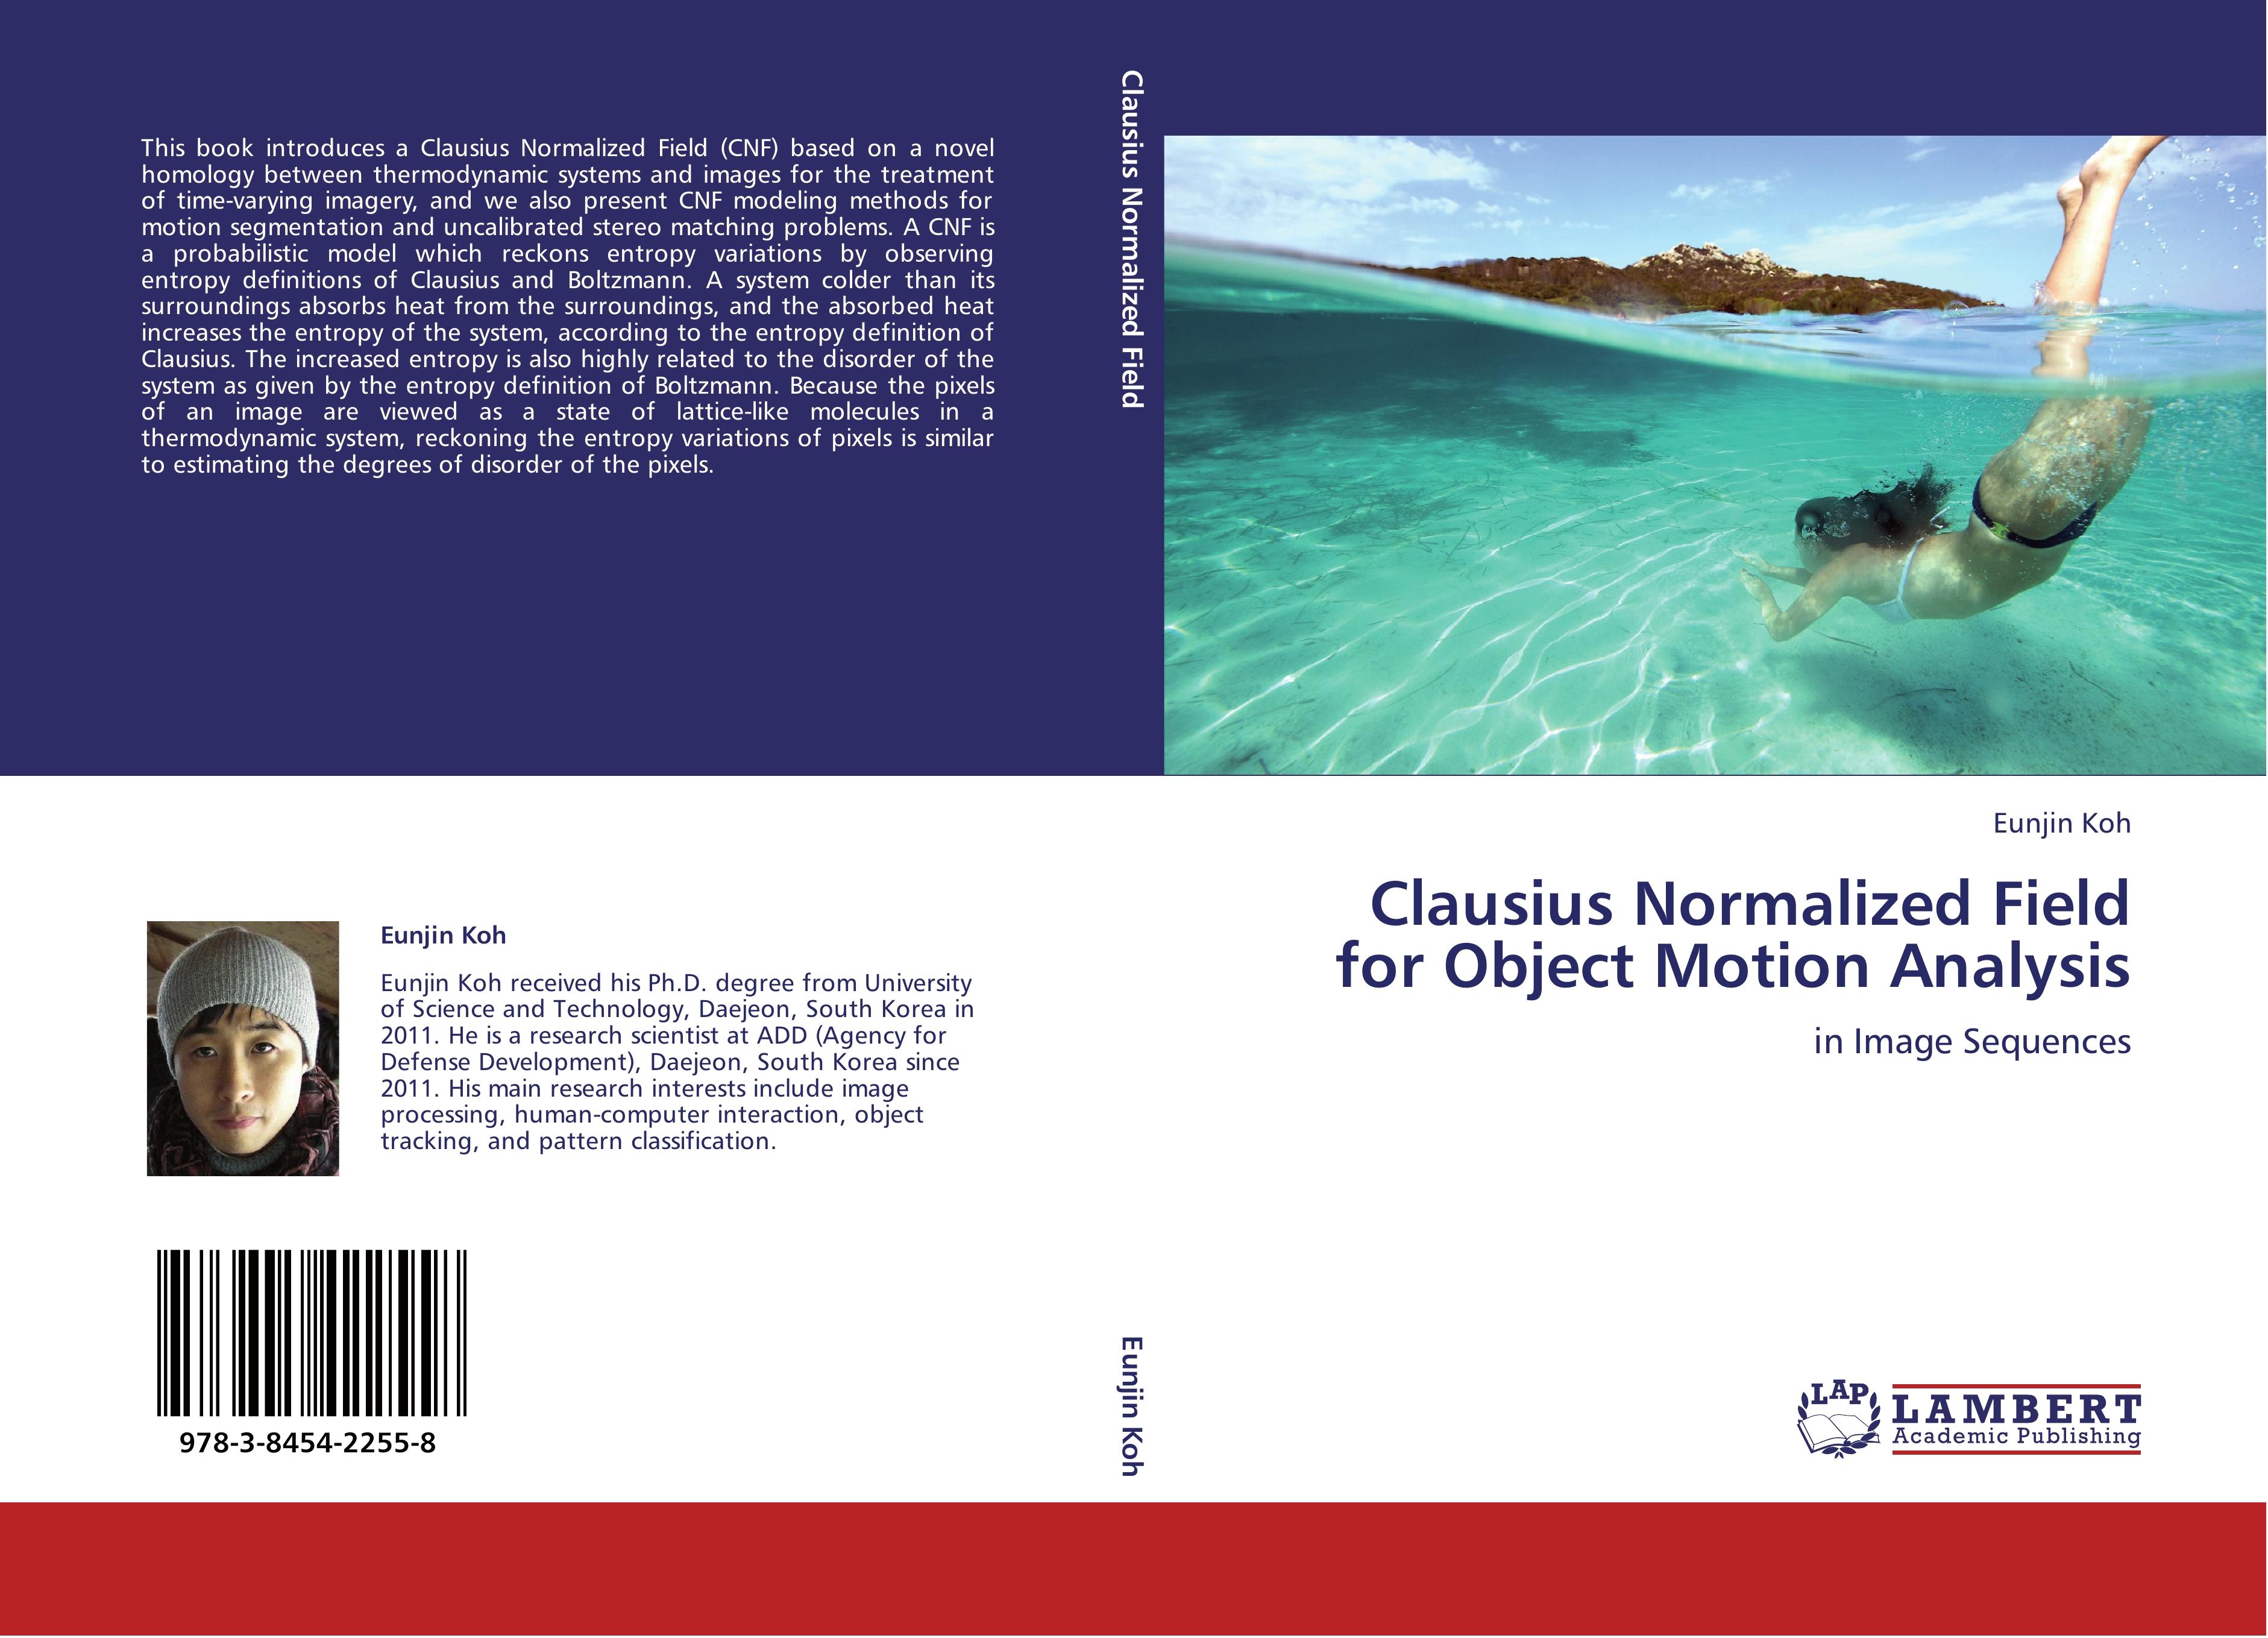 Clausius Normalized Field for Object Motion Analysis - Eunjin Koh